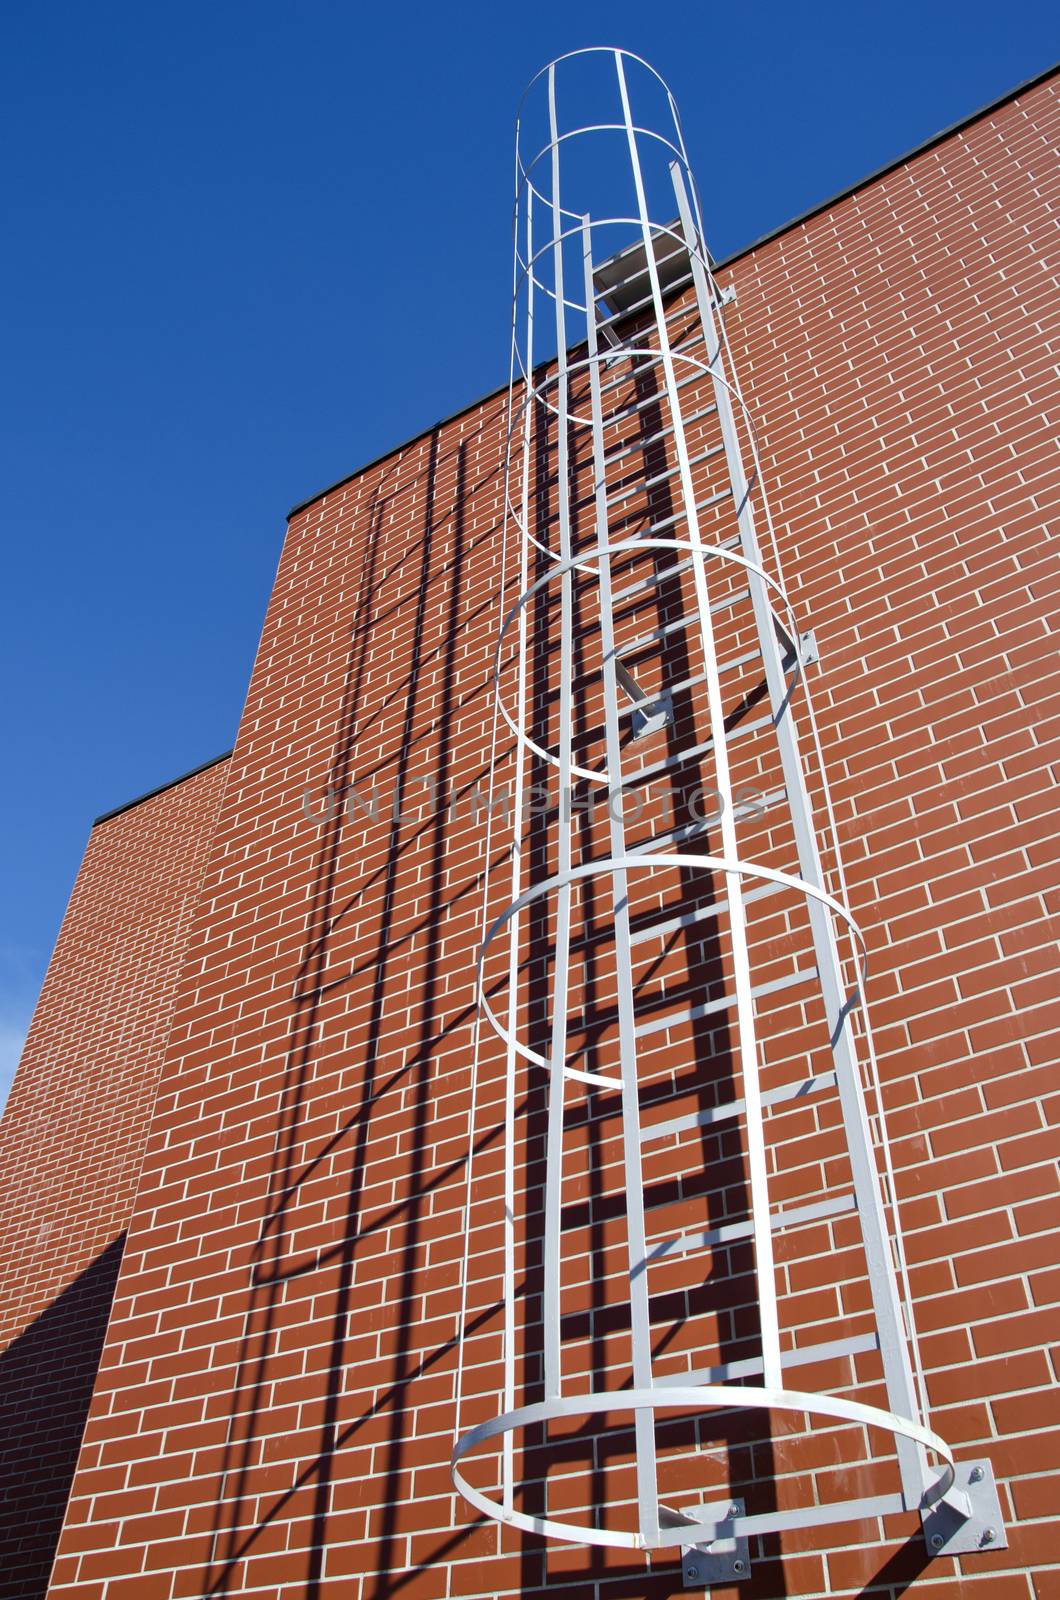 industrial building red bricks wall with metal ladder